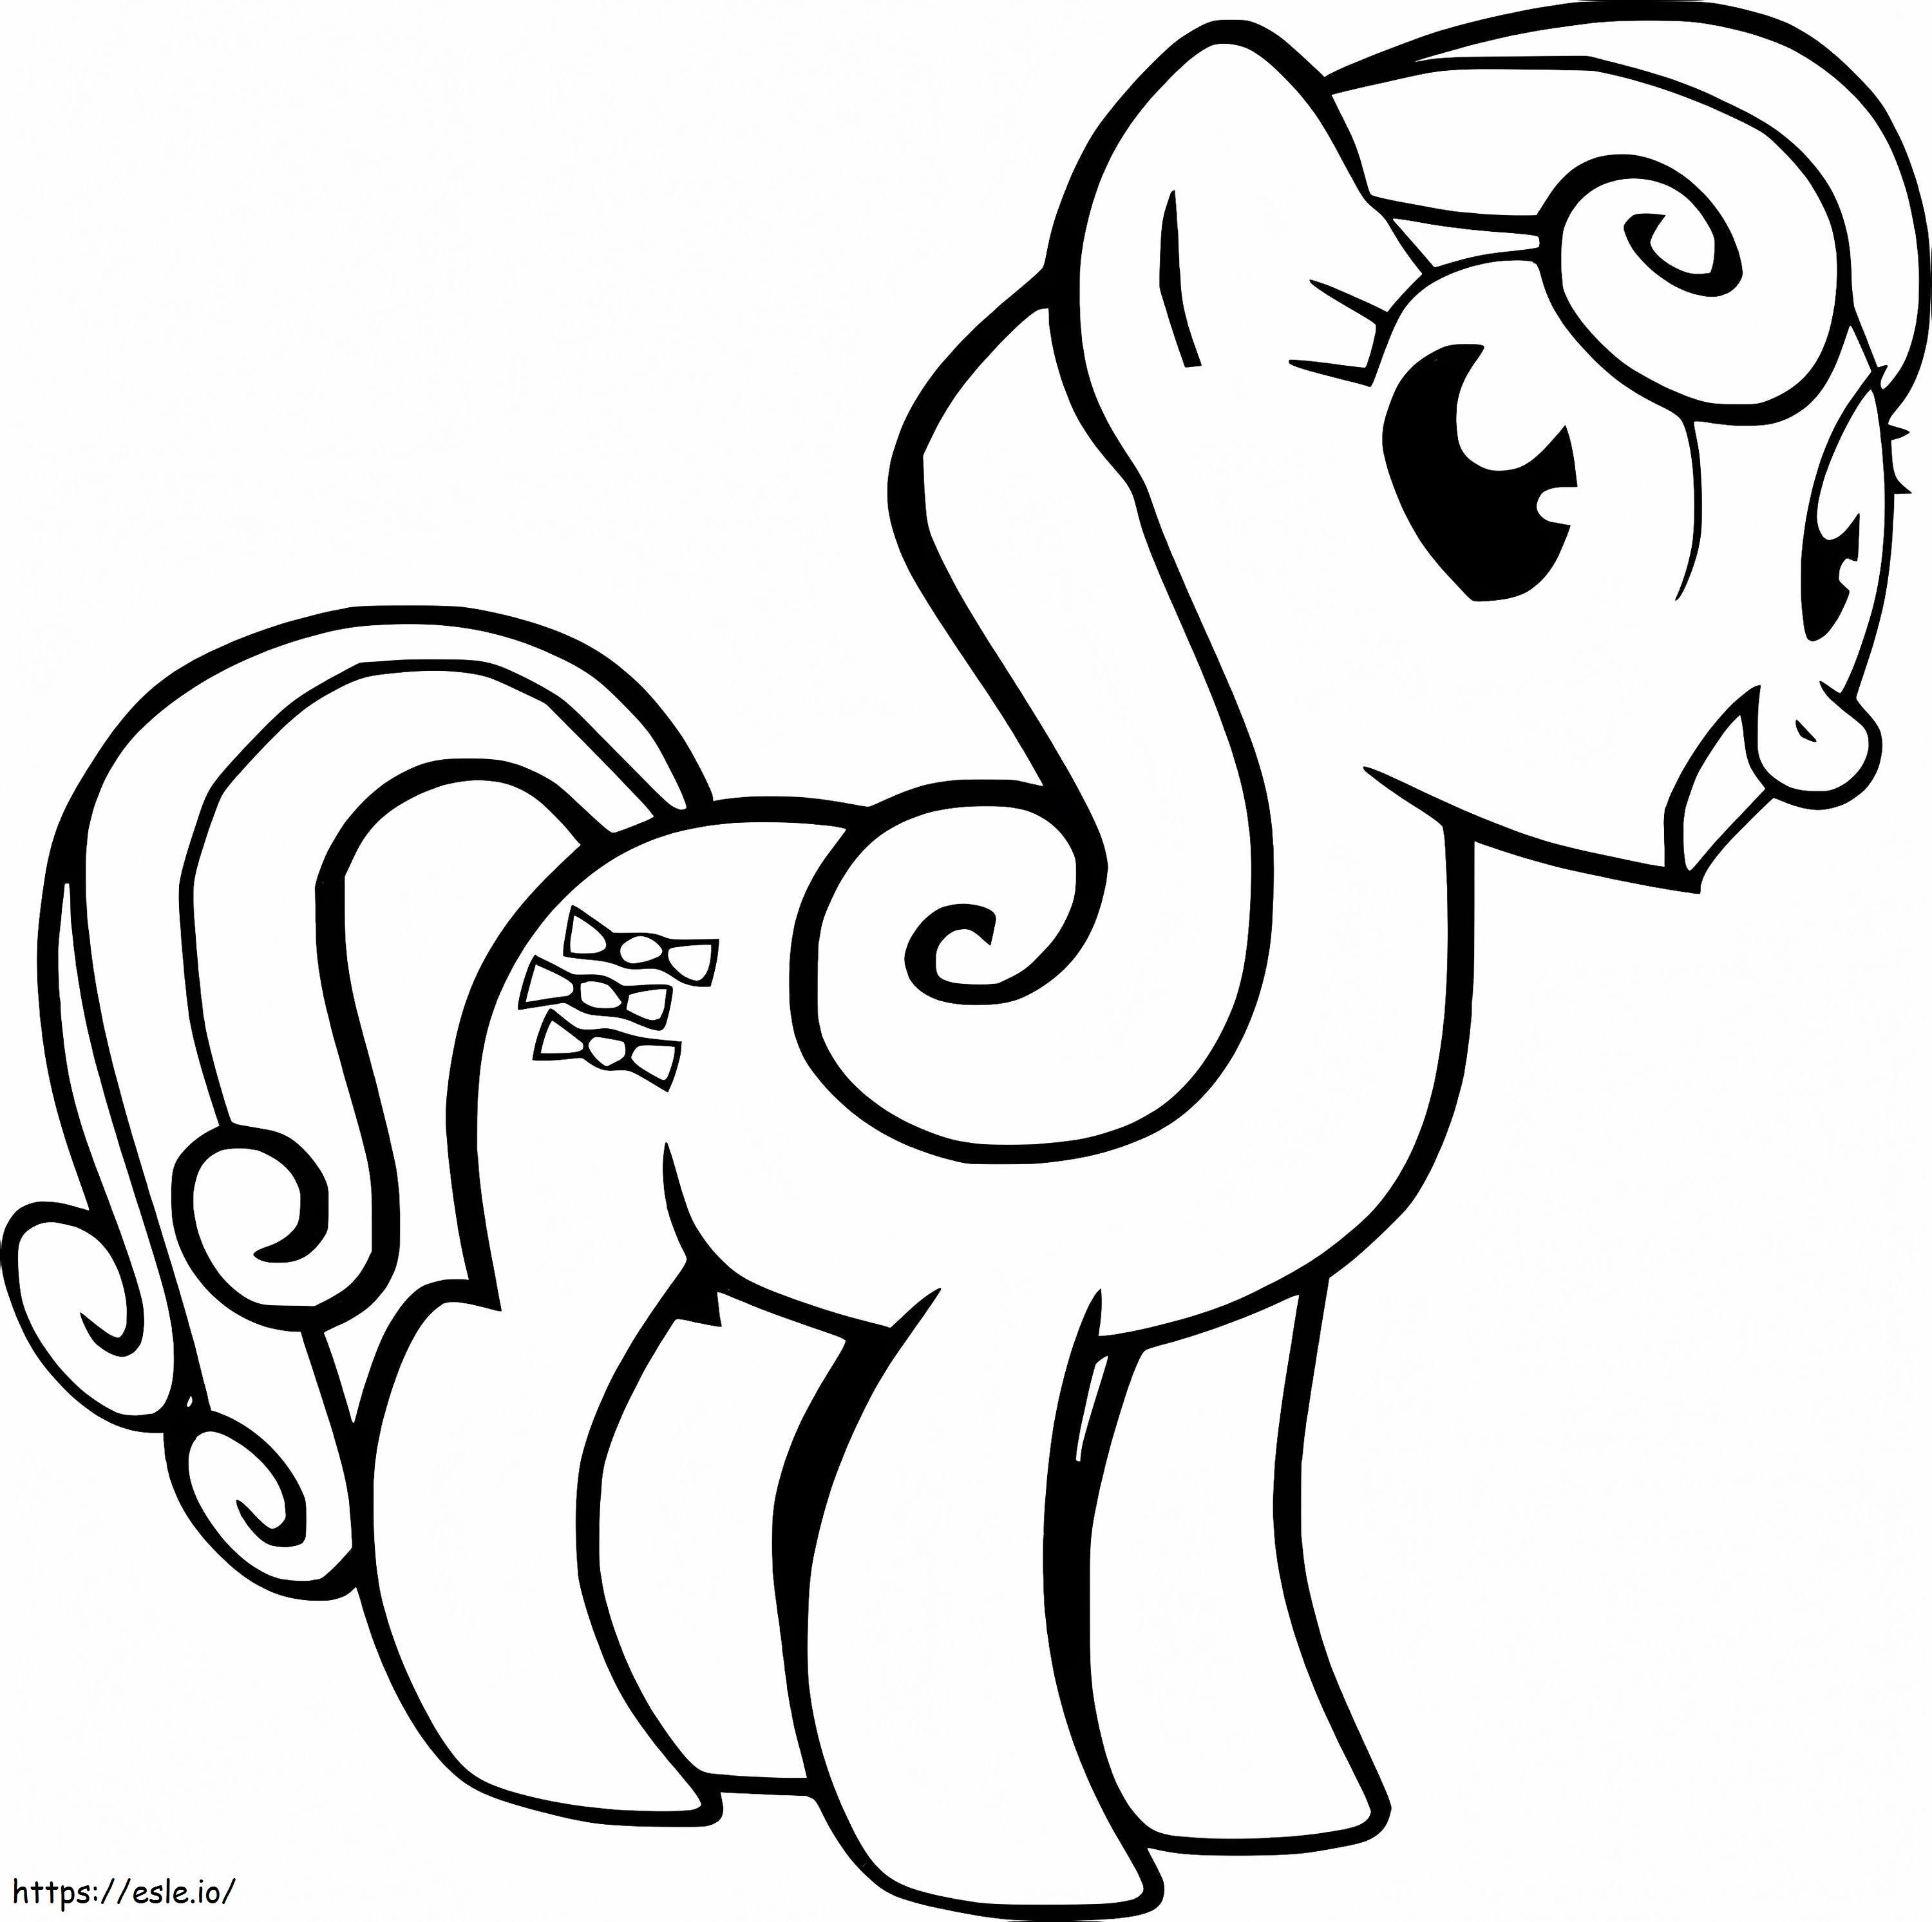 Sweetie Drops My Little Pony coloring page